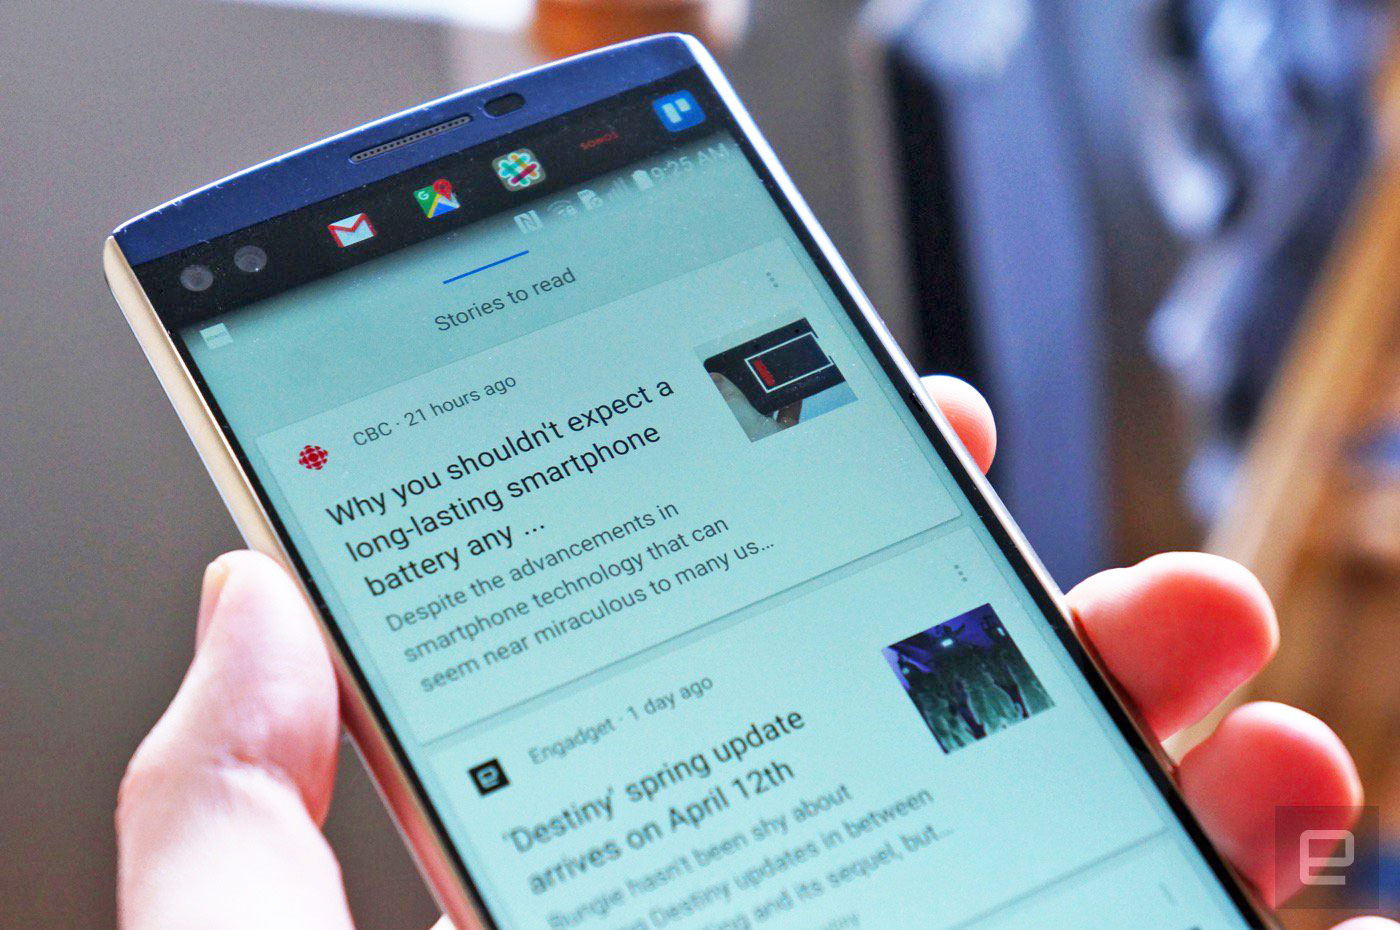 Google News highlights big stories from local news outlets